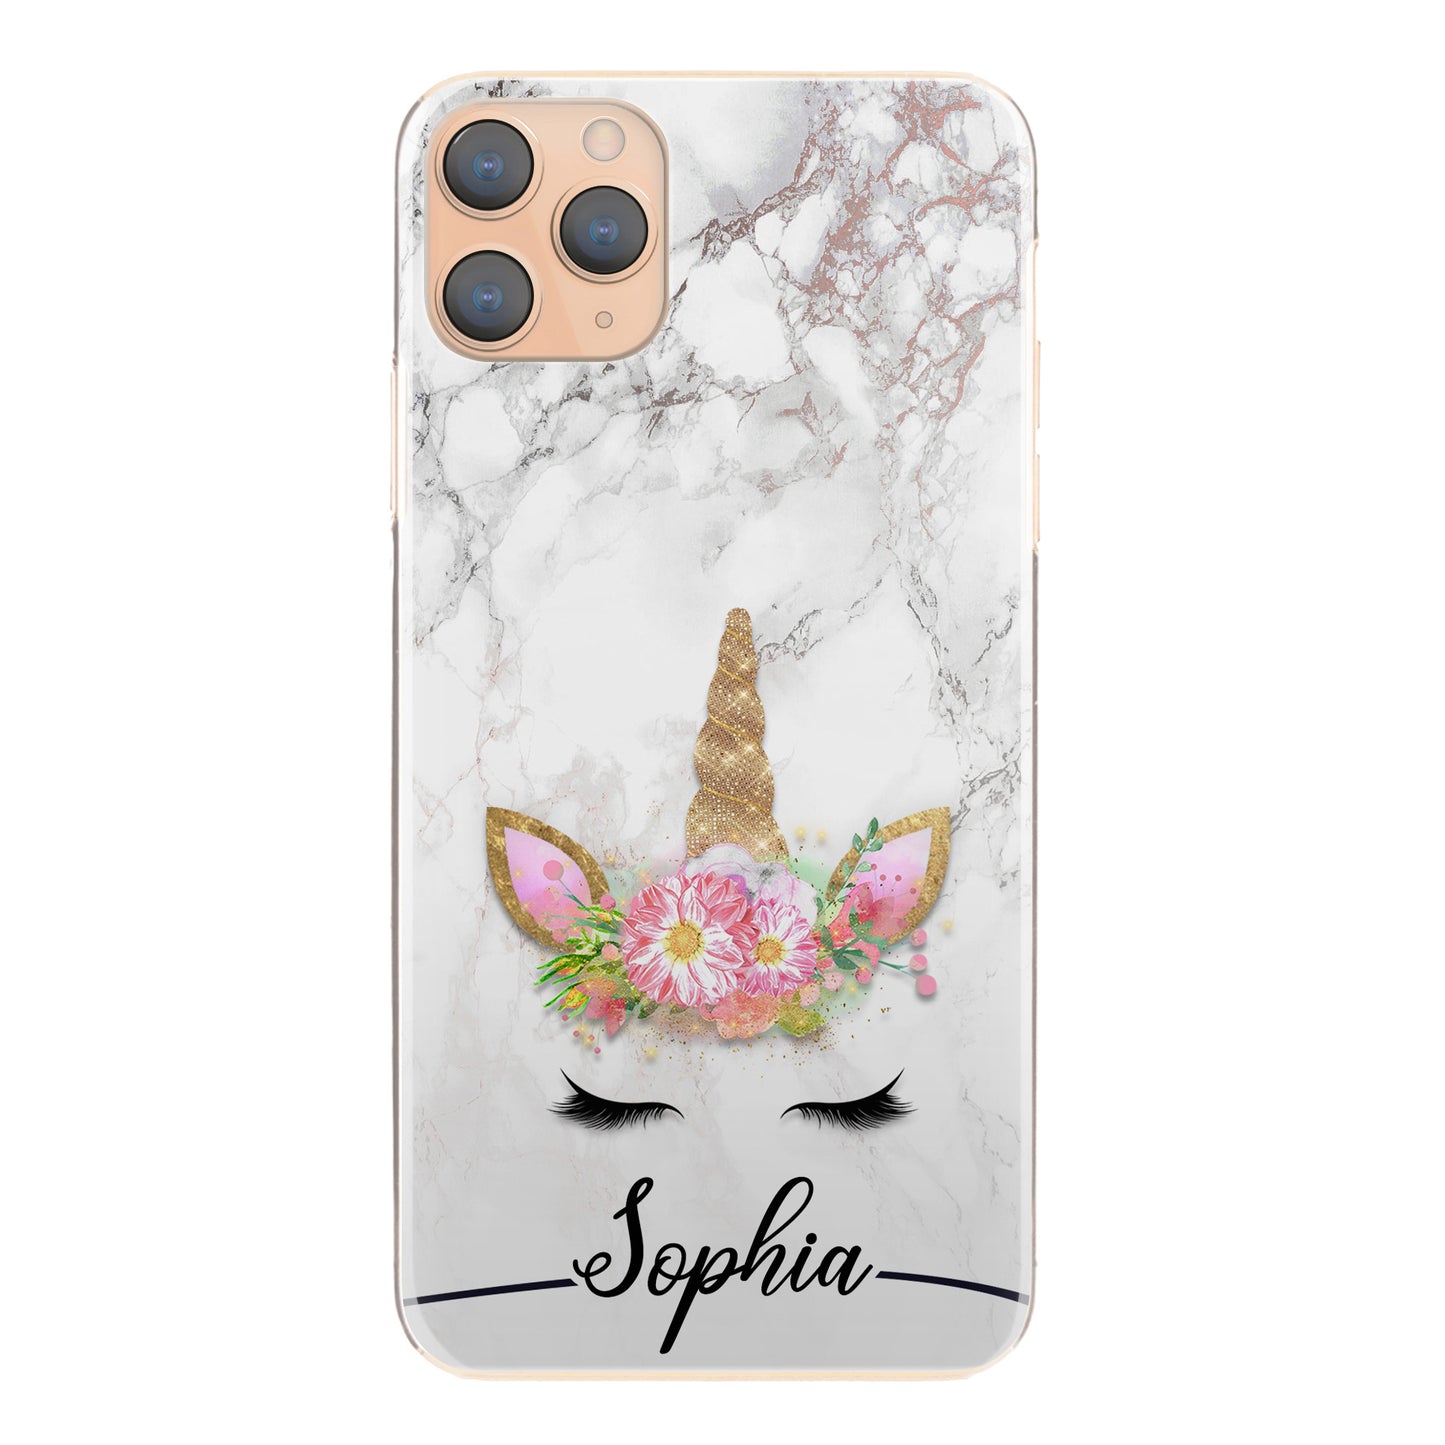 Personalised Xiaomi Phone Hard Case with Gold Floral Unicorn and Text on Grey Marble